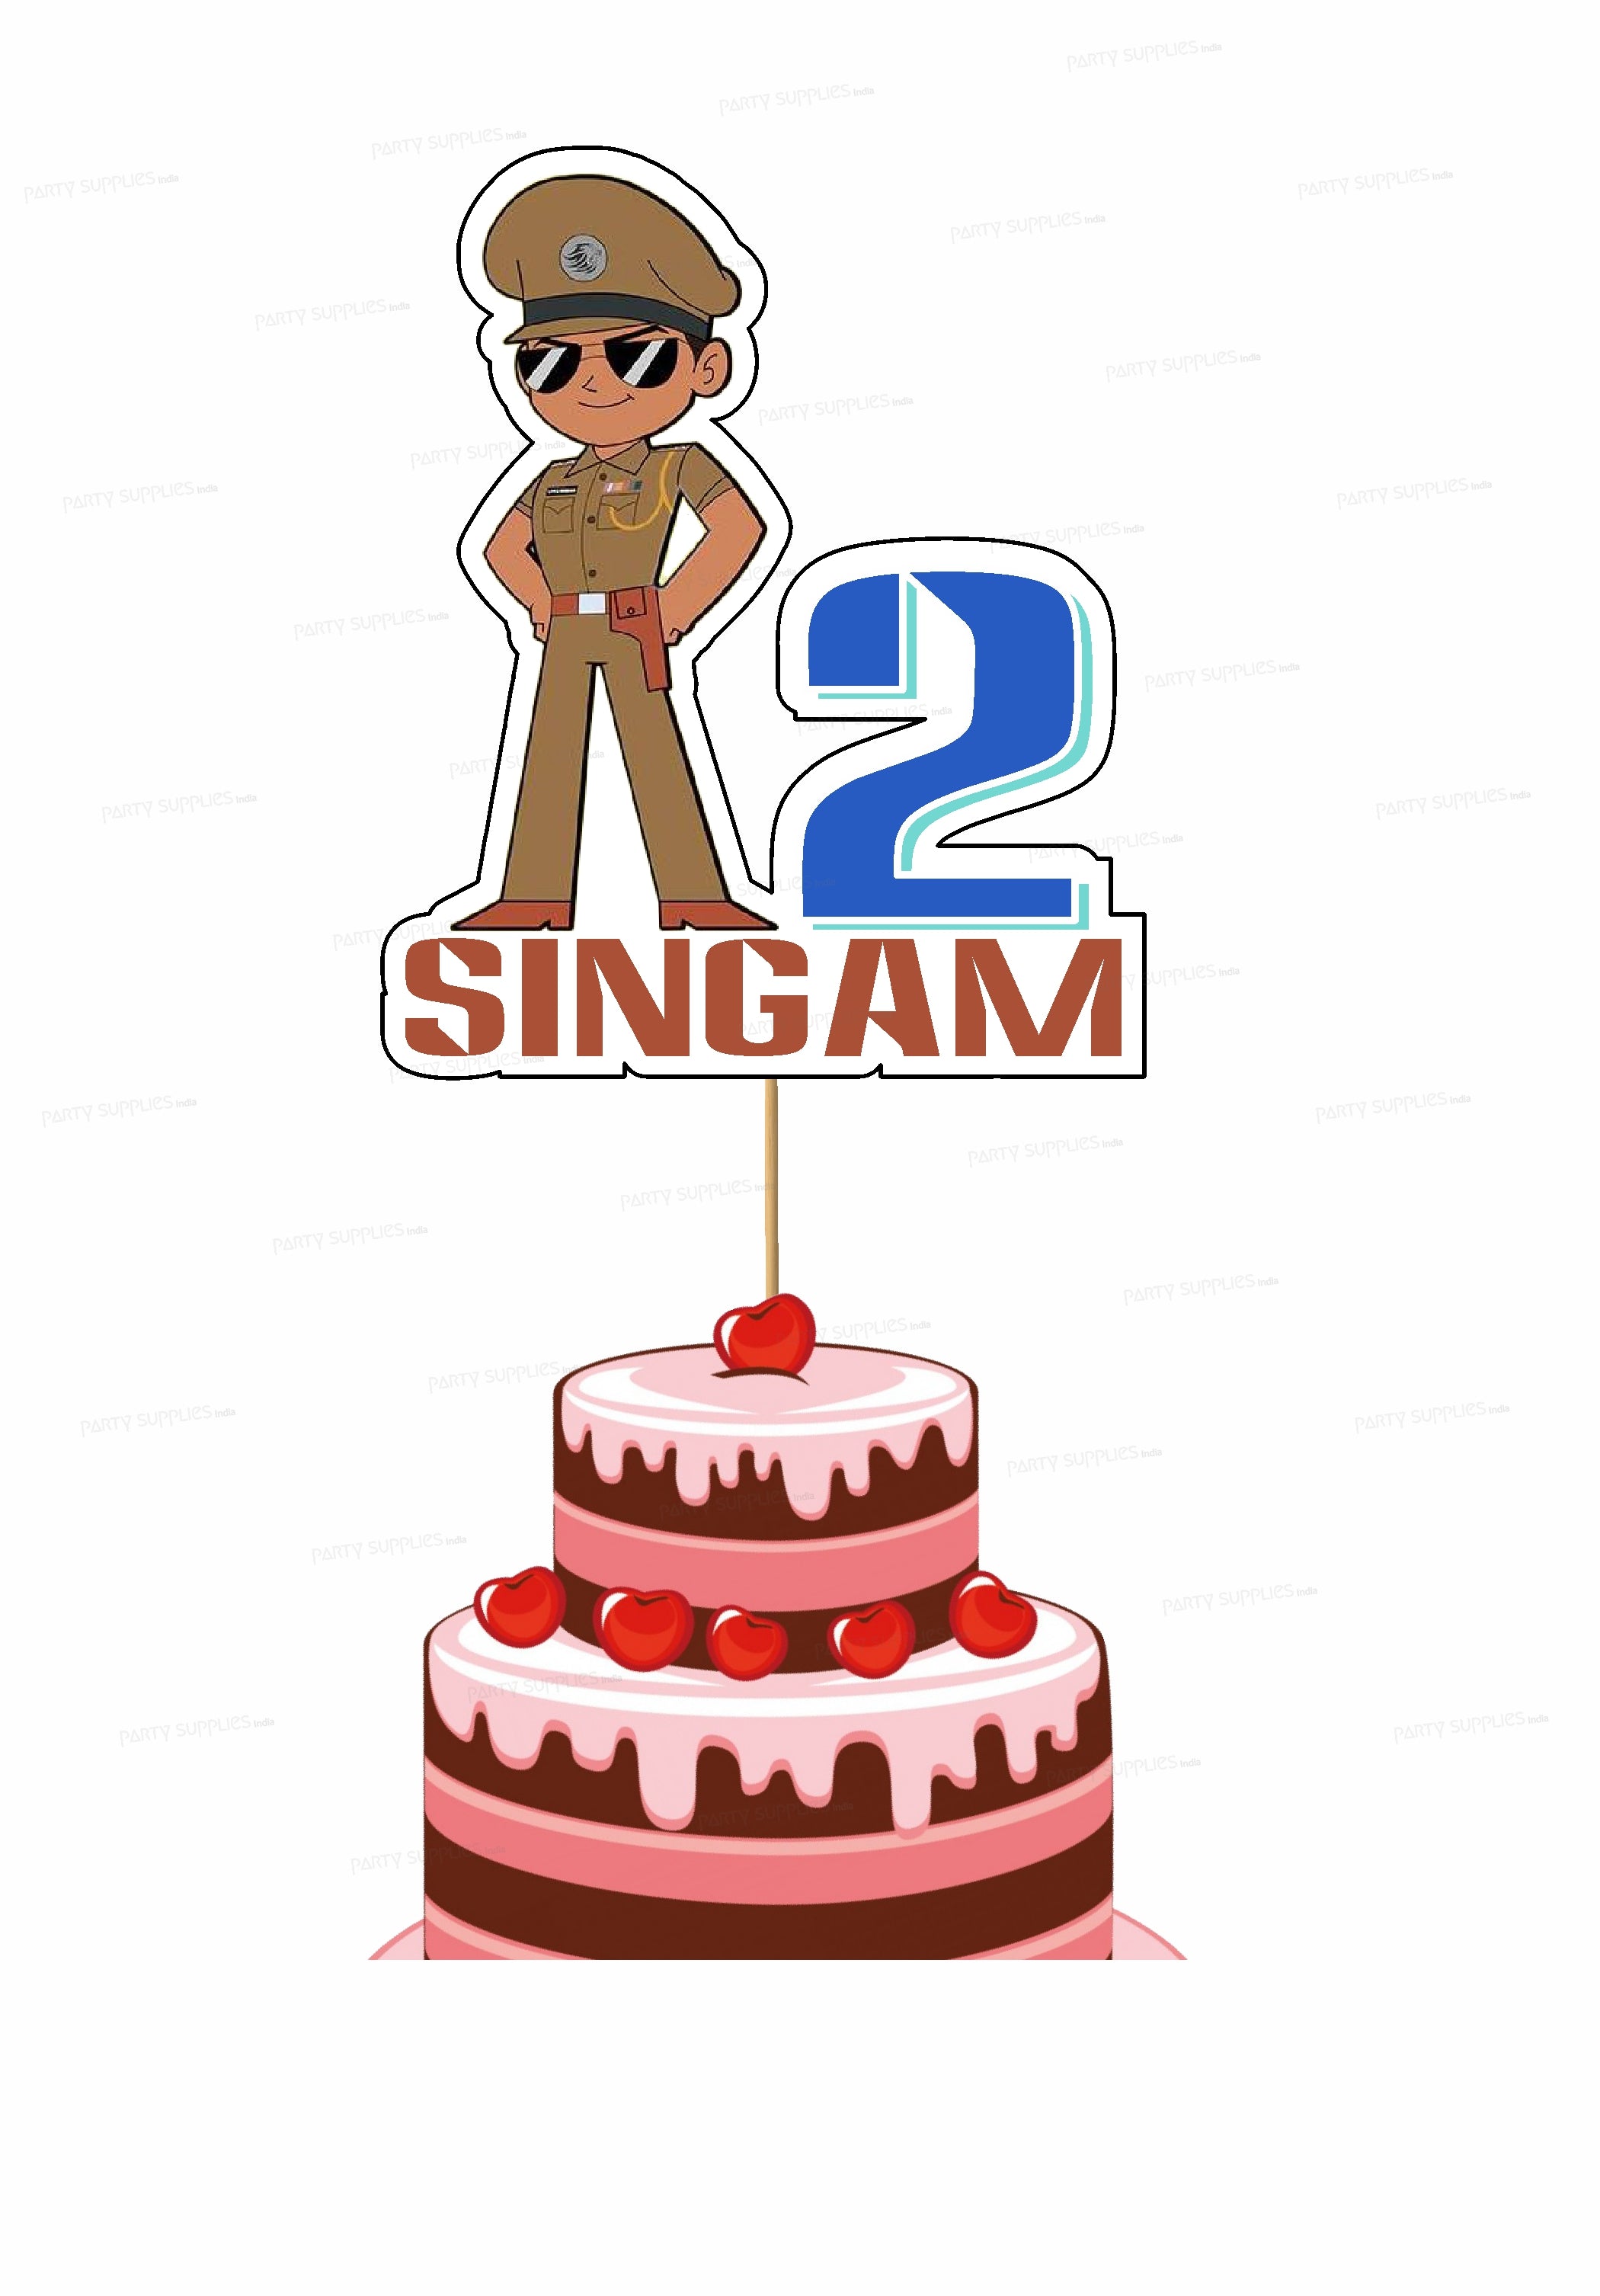 Send little singham cartoon animated chocolate flavor photo cake online by  GiftJaipur in Rajasthan